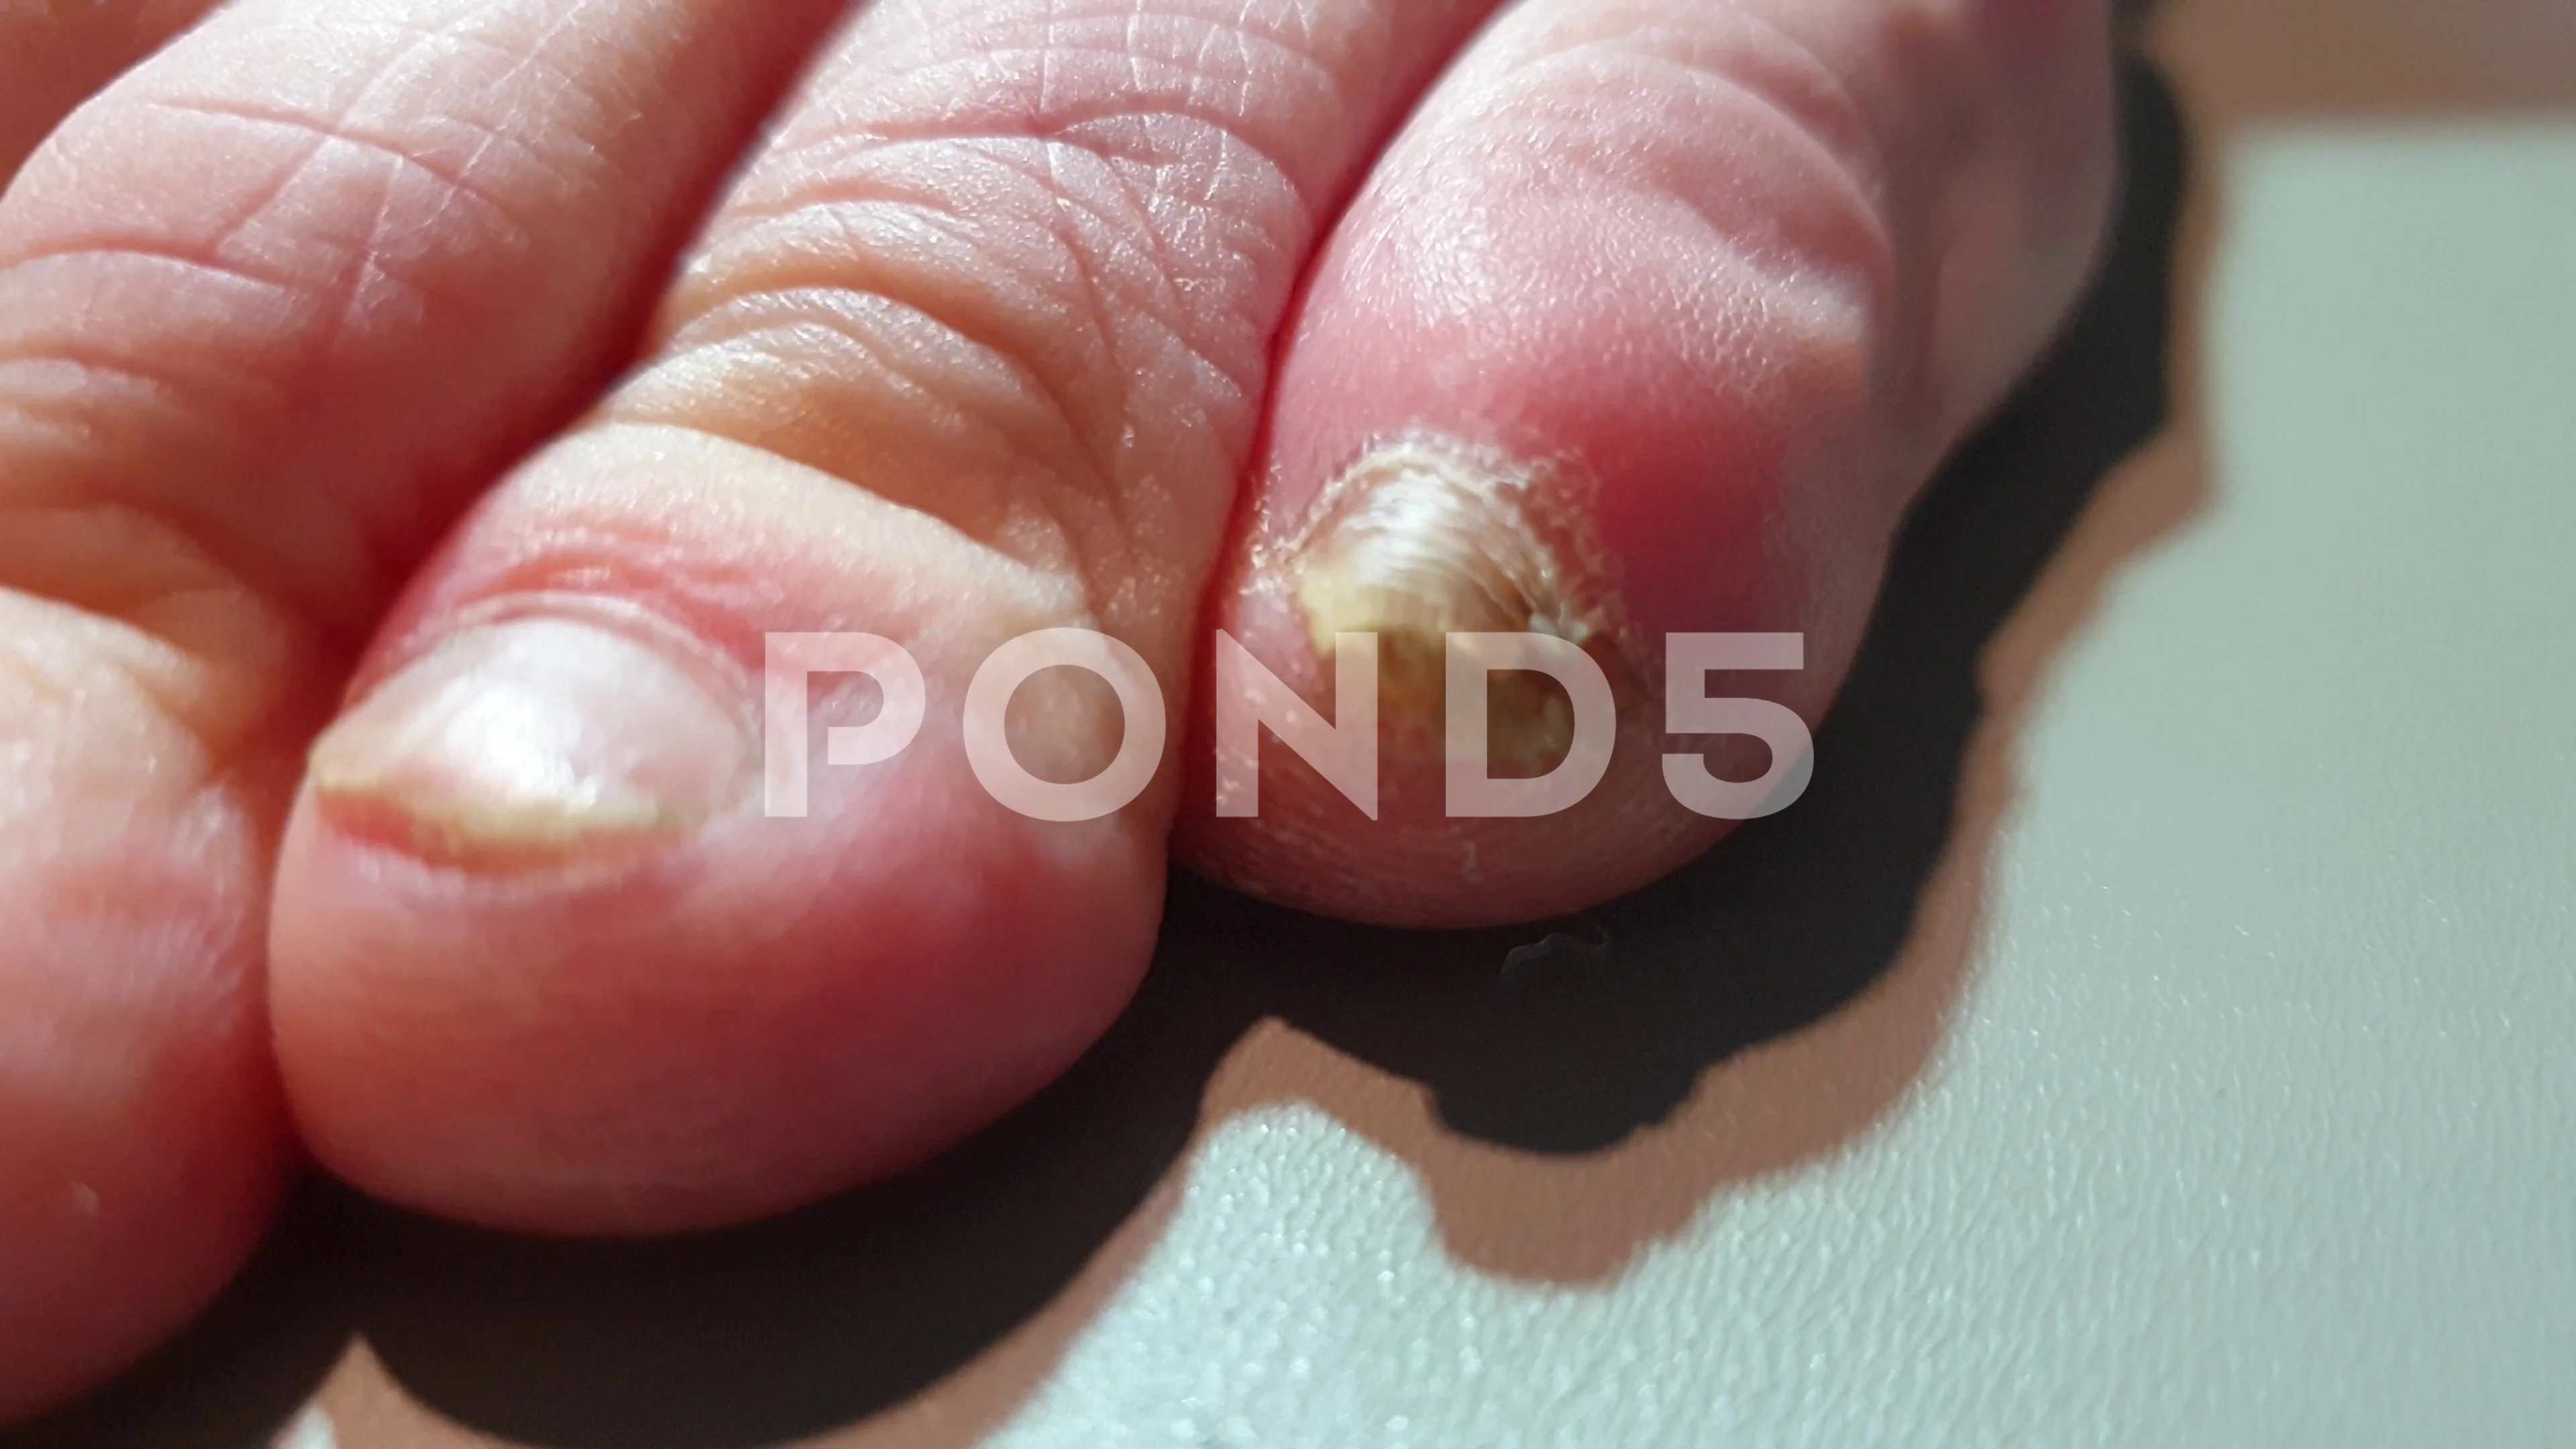 Fungal nail infection treatment - InMaricopa